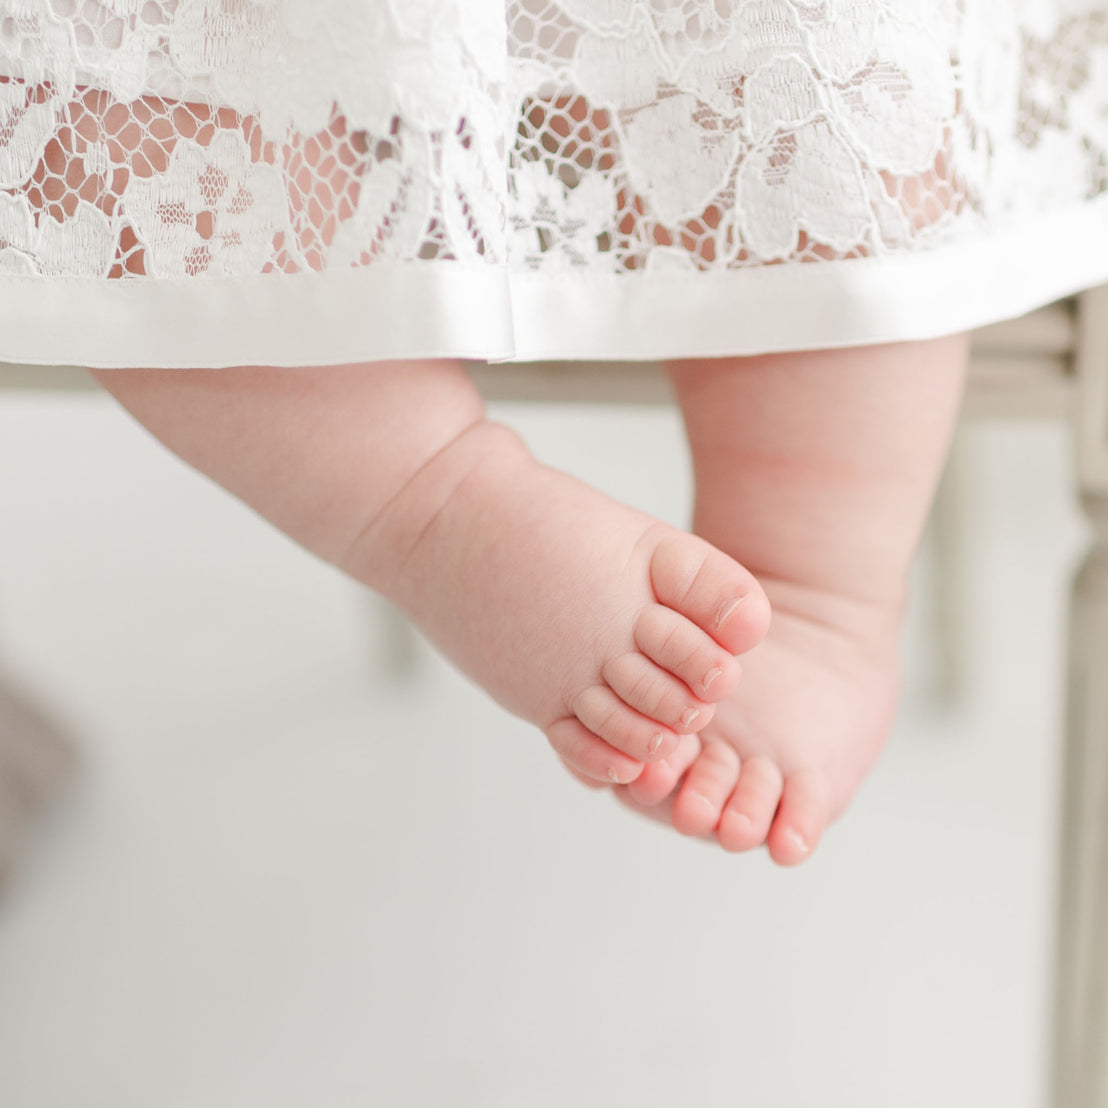 Close-up of a baby's bare feet hanging down, with toes pointing downwards, beneath the hem of the Rose Romper Dress. The background is bright and softly focused.